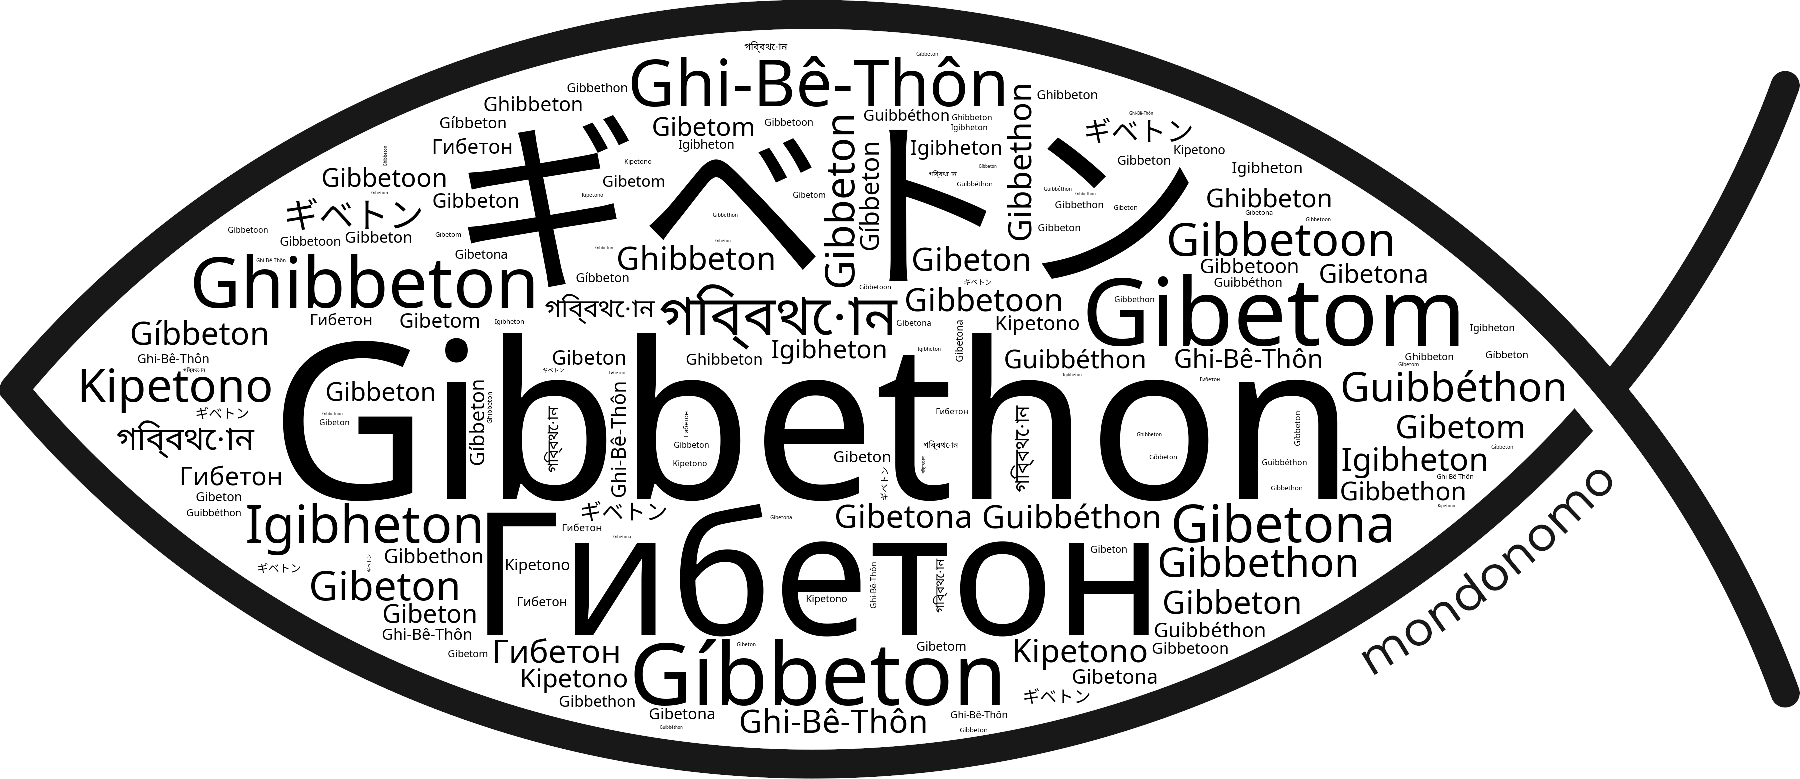 Name Gibbethon in the world's Bibles